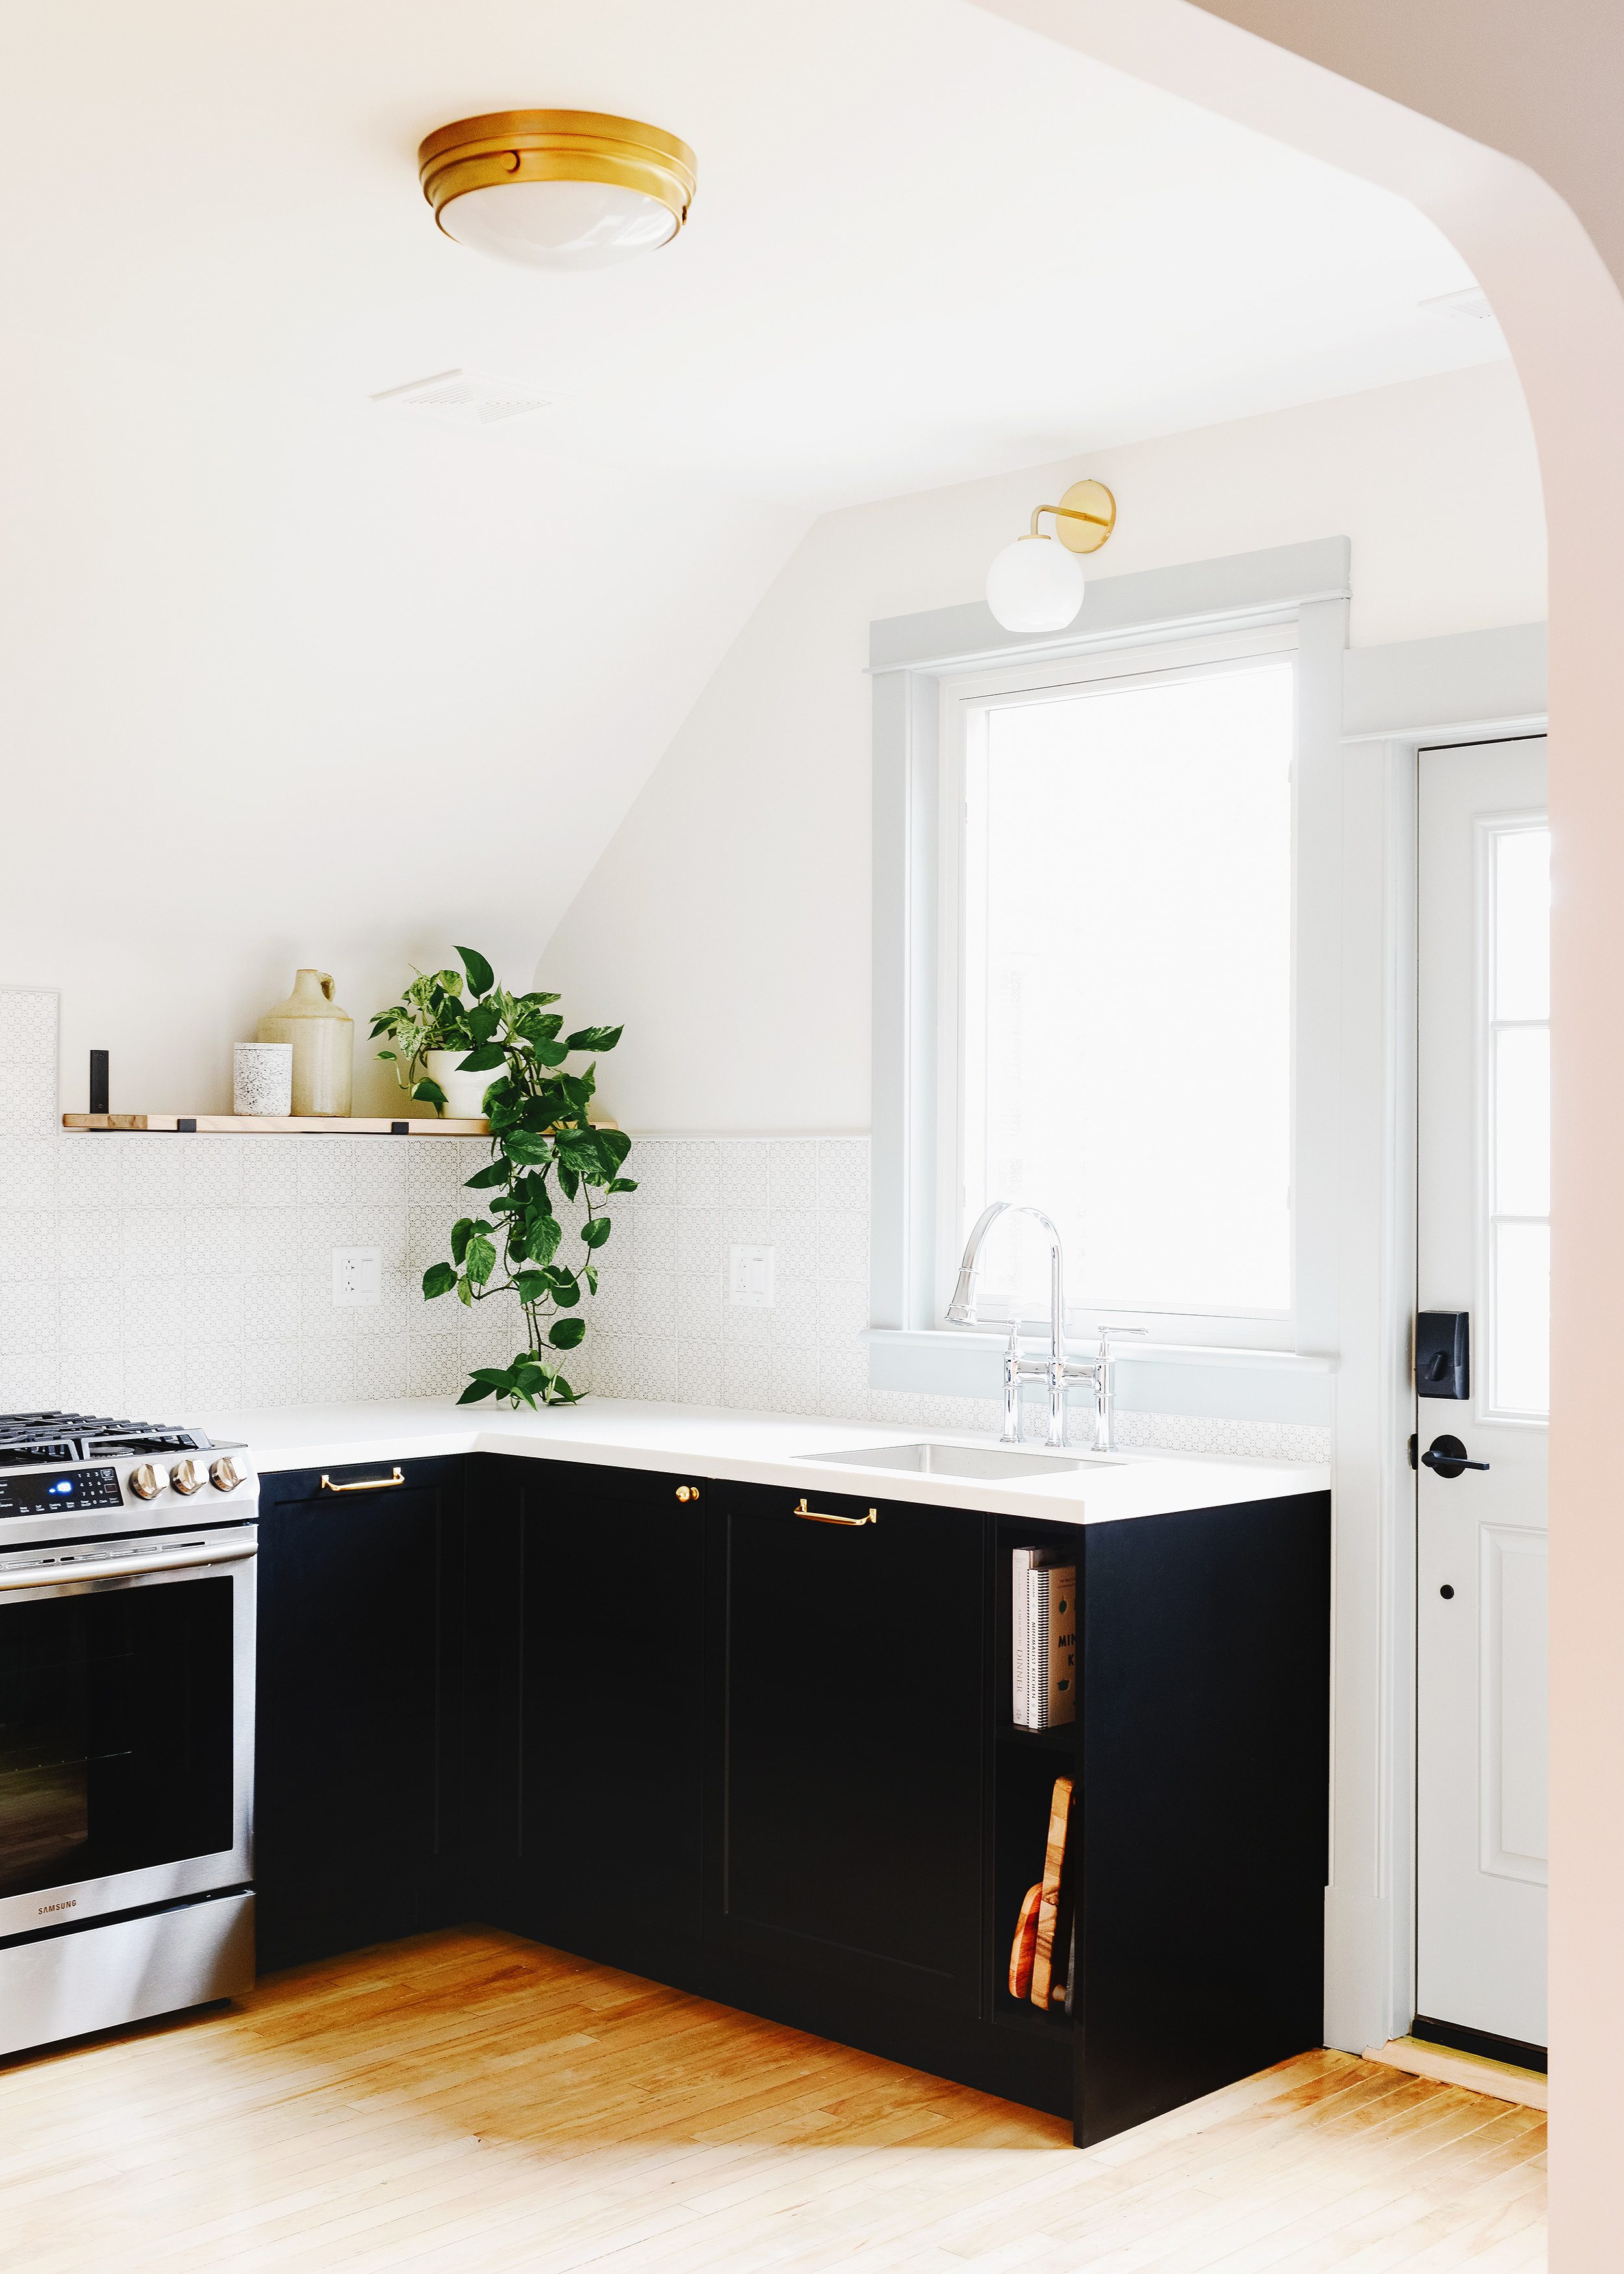 A small kitchen with black base cabinets, square tile, brass hardware and open shelving. | via Yellow Brick Home